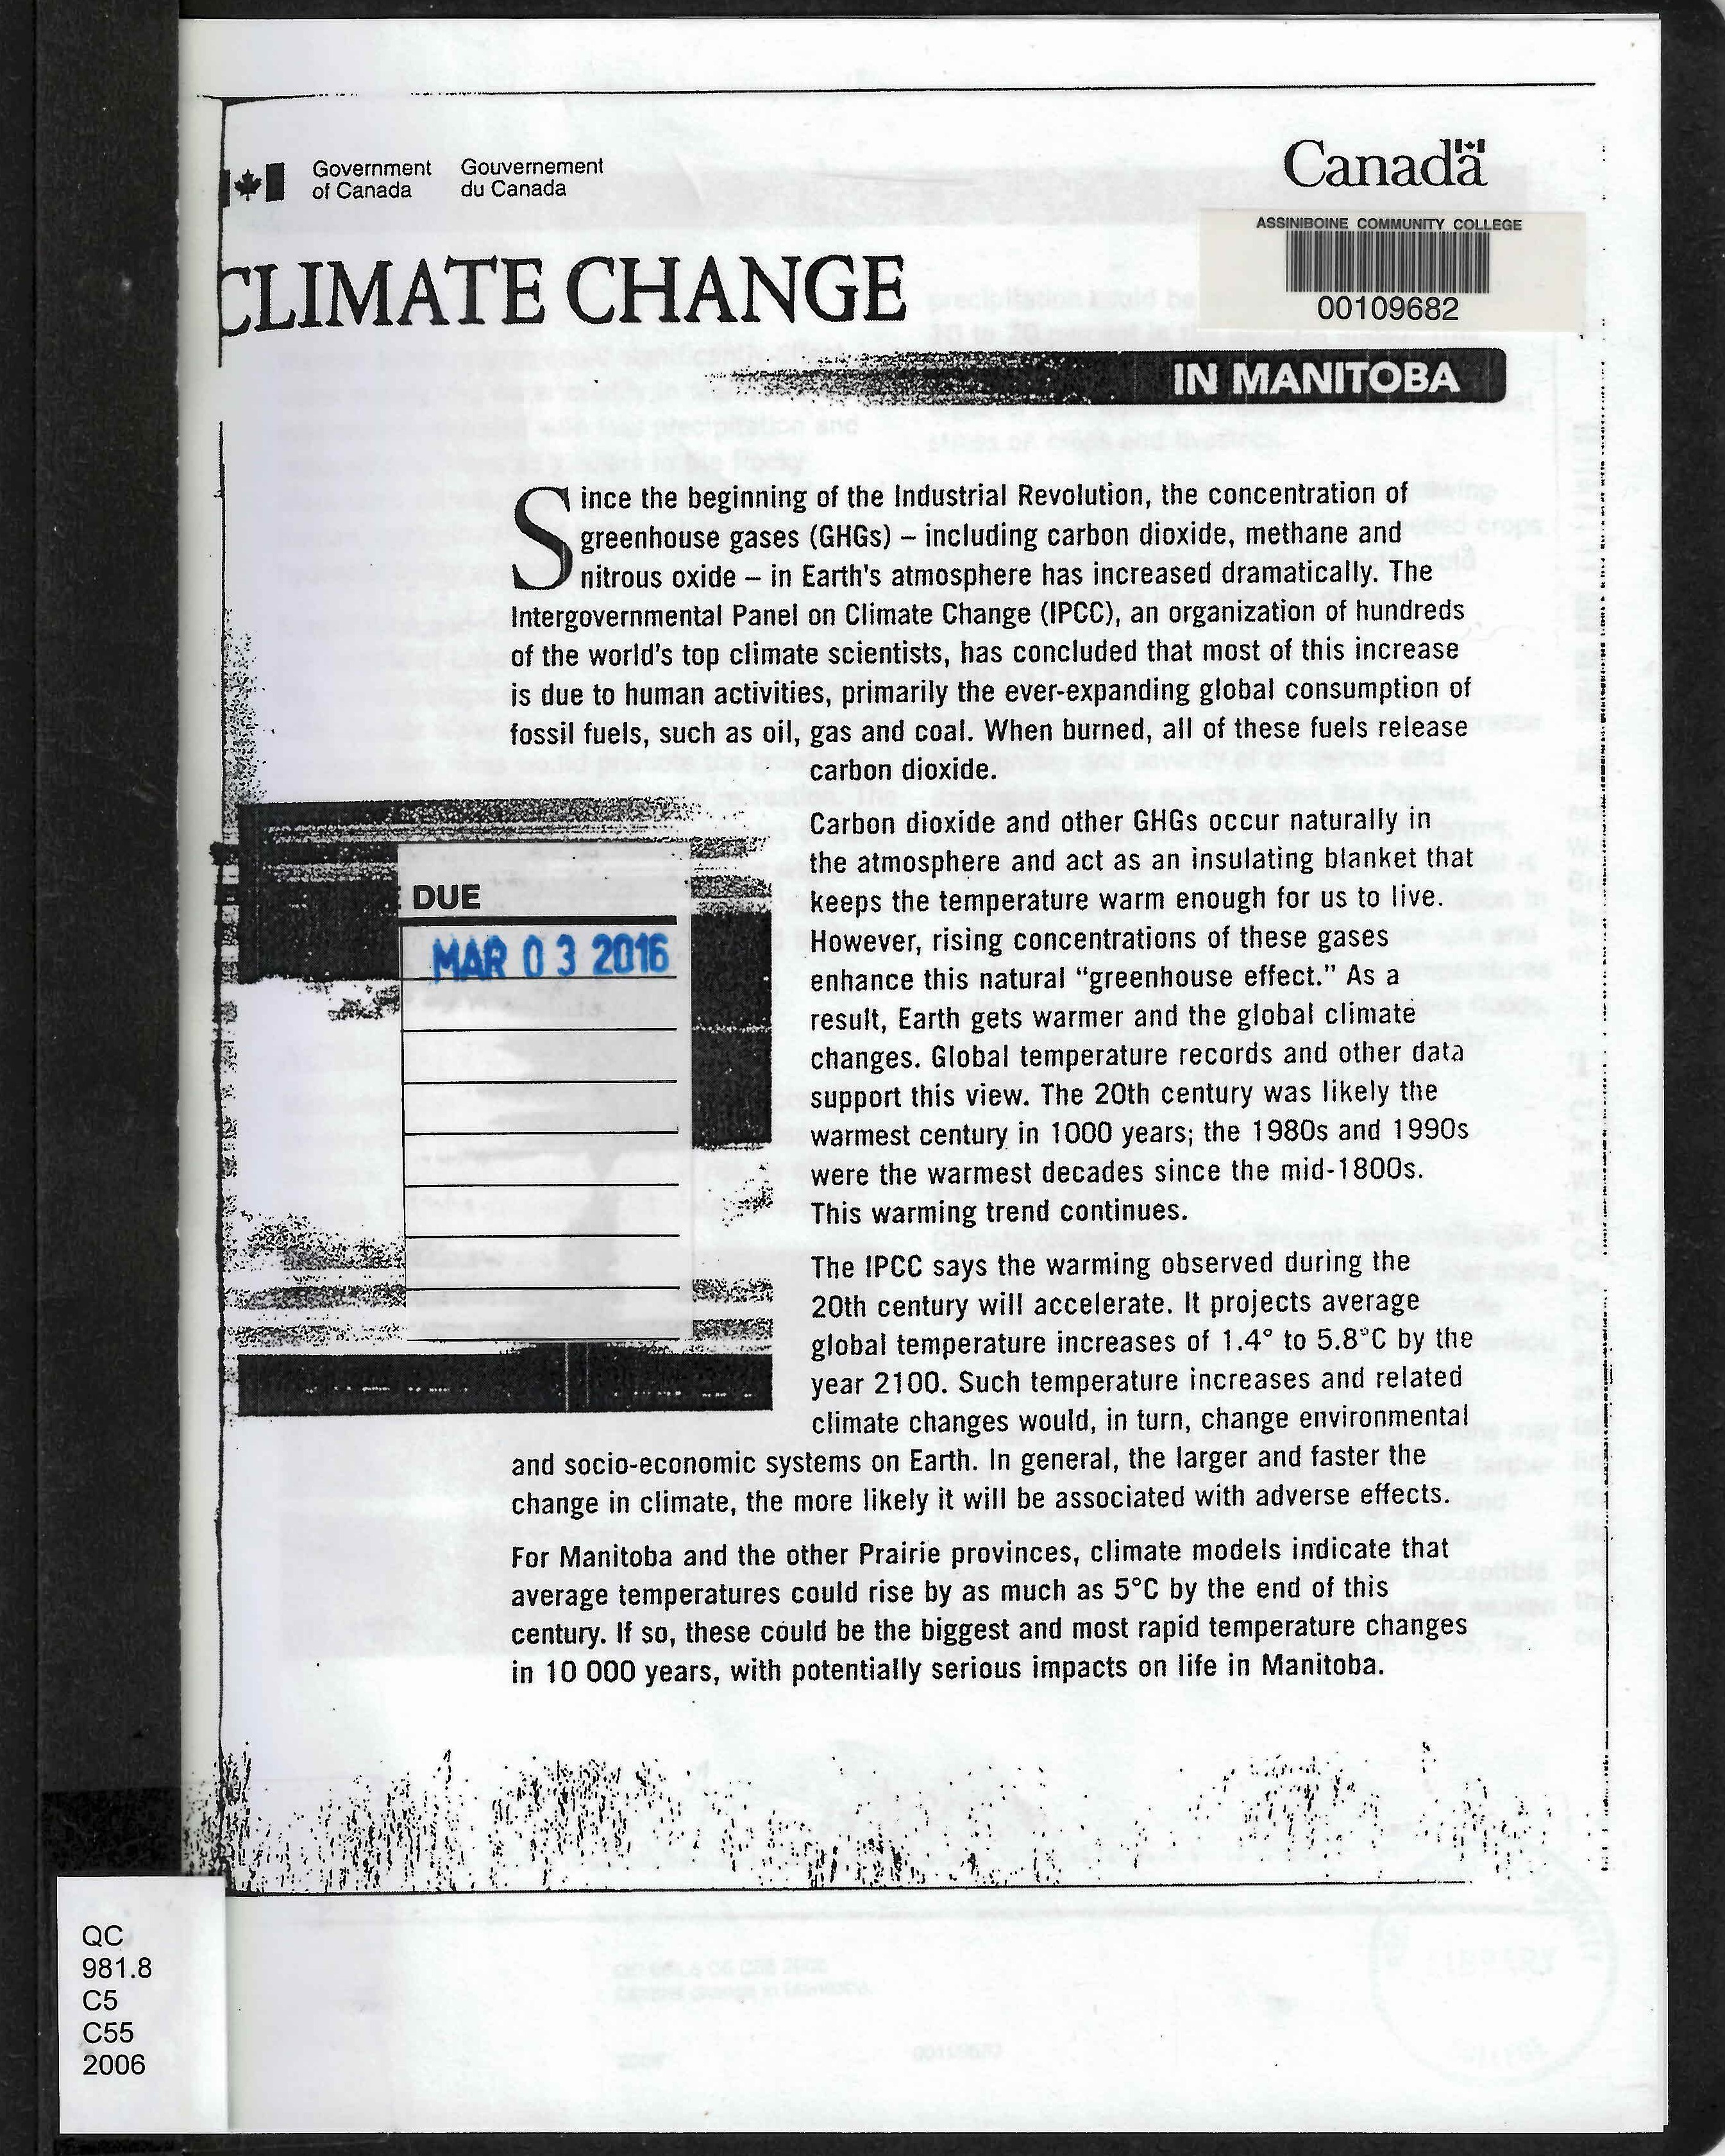 Climate change in Manitoba.